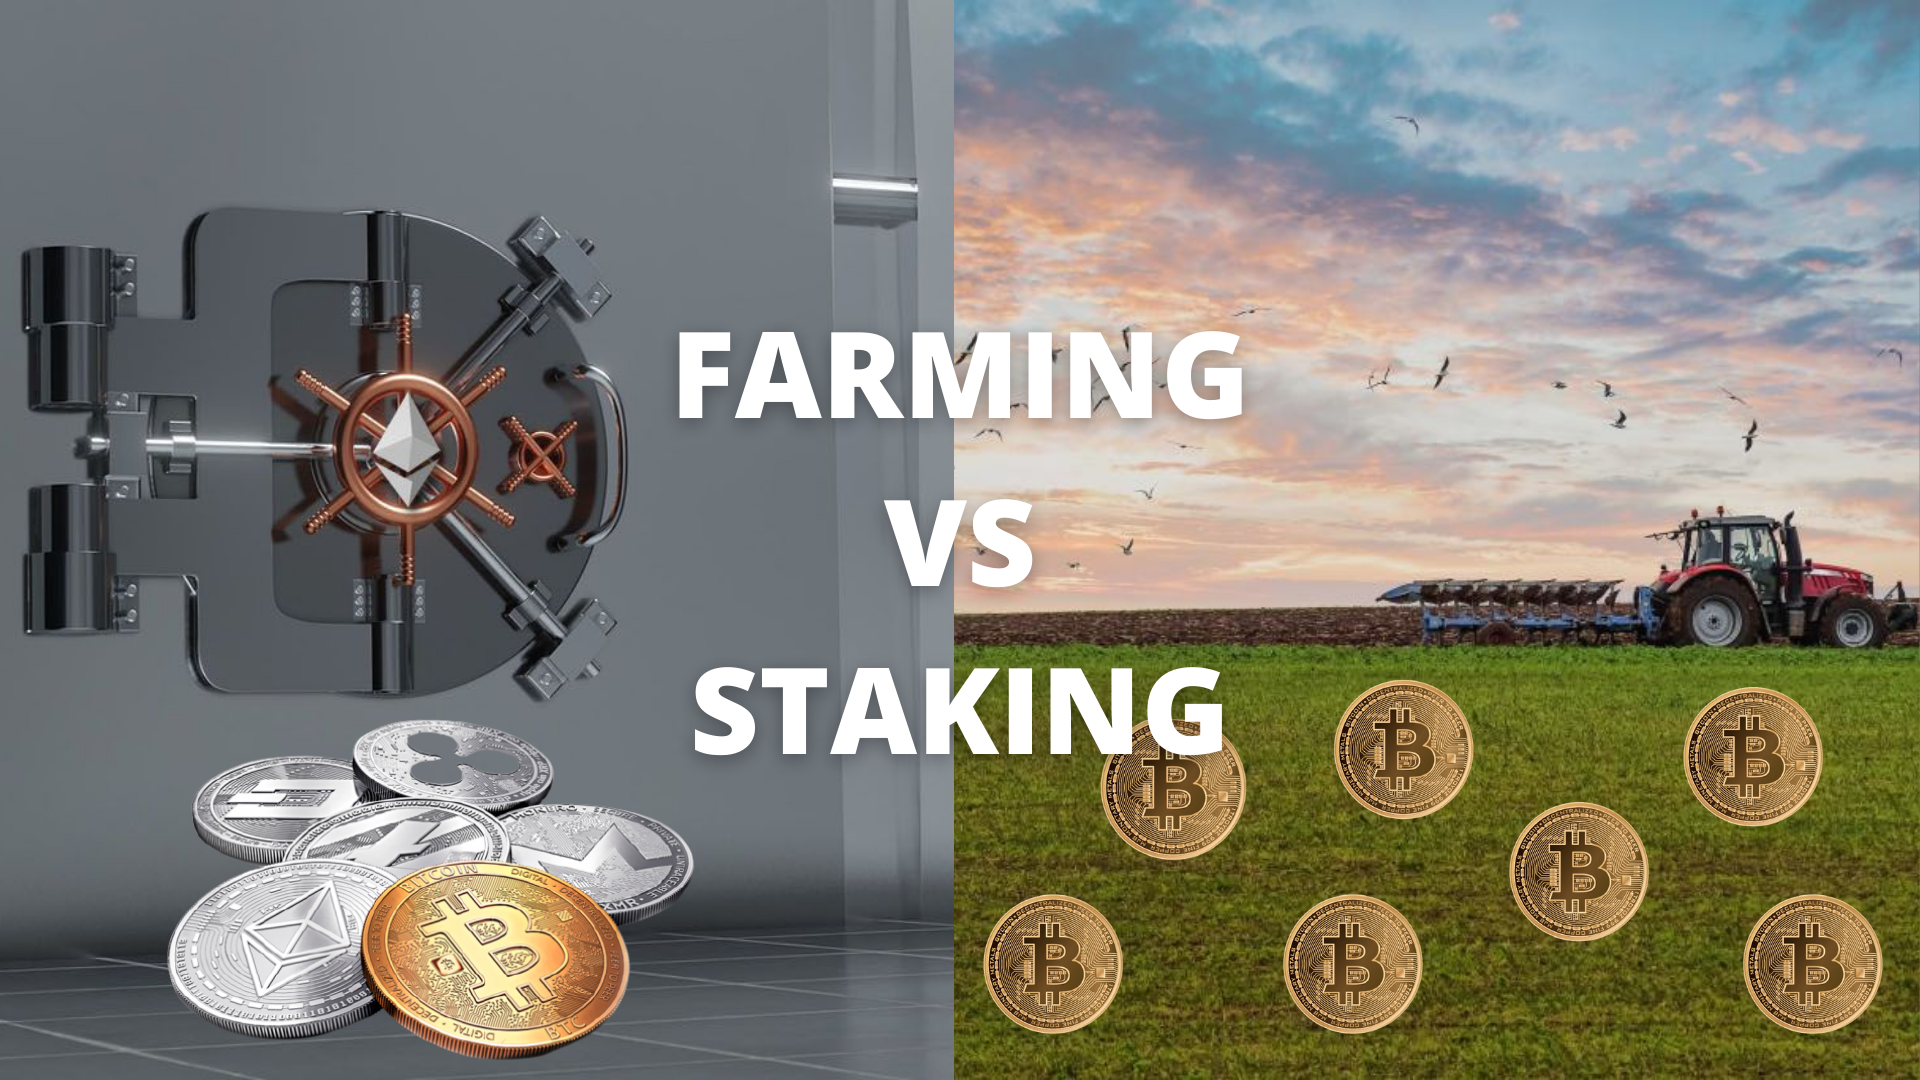 What Are The Differences Between Staking And Farming? Here’s What You Should Know